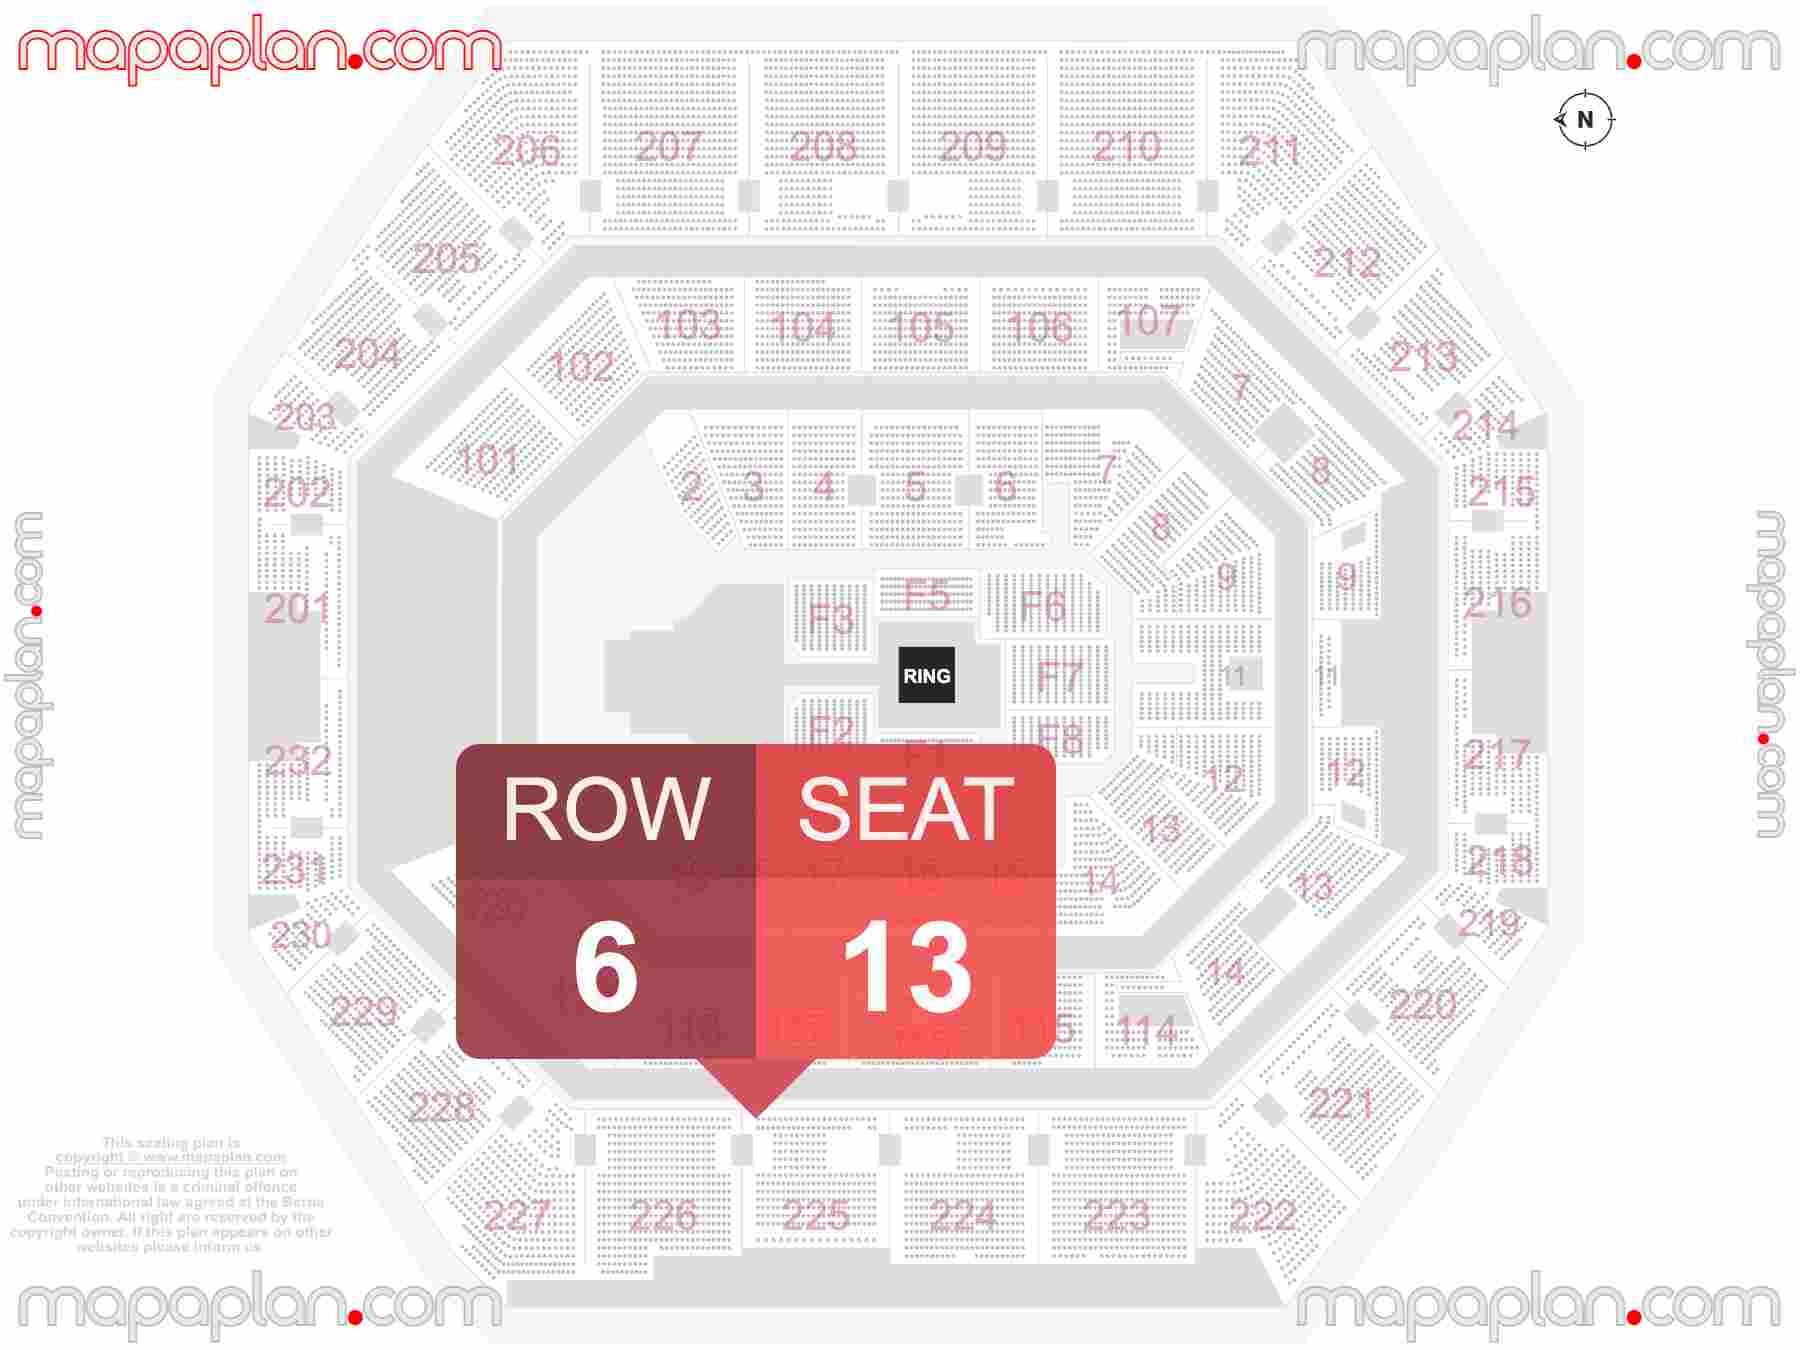 Indianapolis Gainbridge Fieldhouse seating chart WWE wrestling & boxing find best seats row numbering system plan showing how many seats per row - Individual 'find my seat' virtual locator